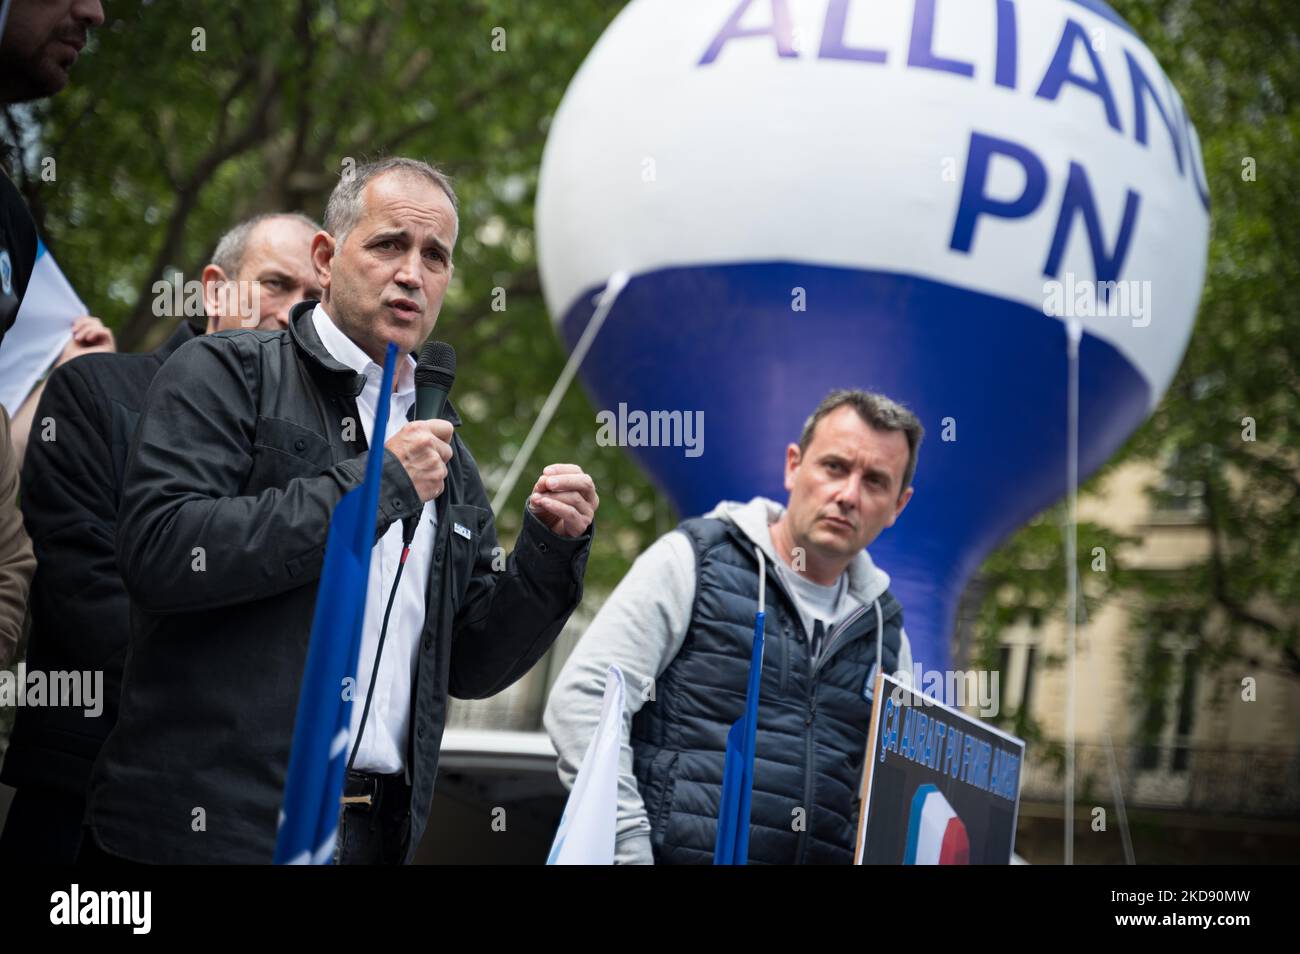 Fabien Vanhemelryck, secretary general of the Alliance Police Nationale union, and Olivier Varlet, secretary general of the UNSA Police, speak at a police demonstration in Paris on May 2, 2022 to protest the indictment for 'voluntary manslaughter' of the French police officer who killed two men who allegedly forced a checkpoint on the Pont-Neuf in Paris on April 24, 2022. The call for the rally was initiated by the Alliance Police Nationale union, which was joined by the Synergie officers' union and Unsa-Police. (Photo by Samuel Boivin/NurPhoto) Stock Photo